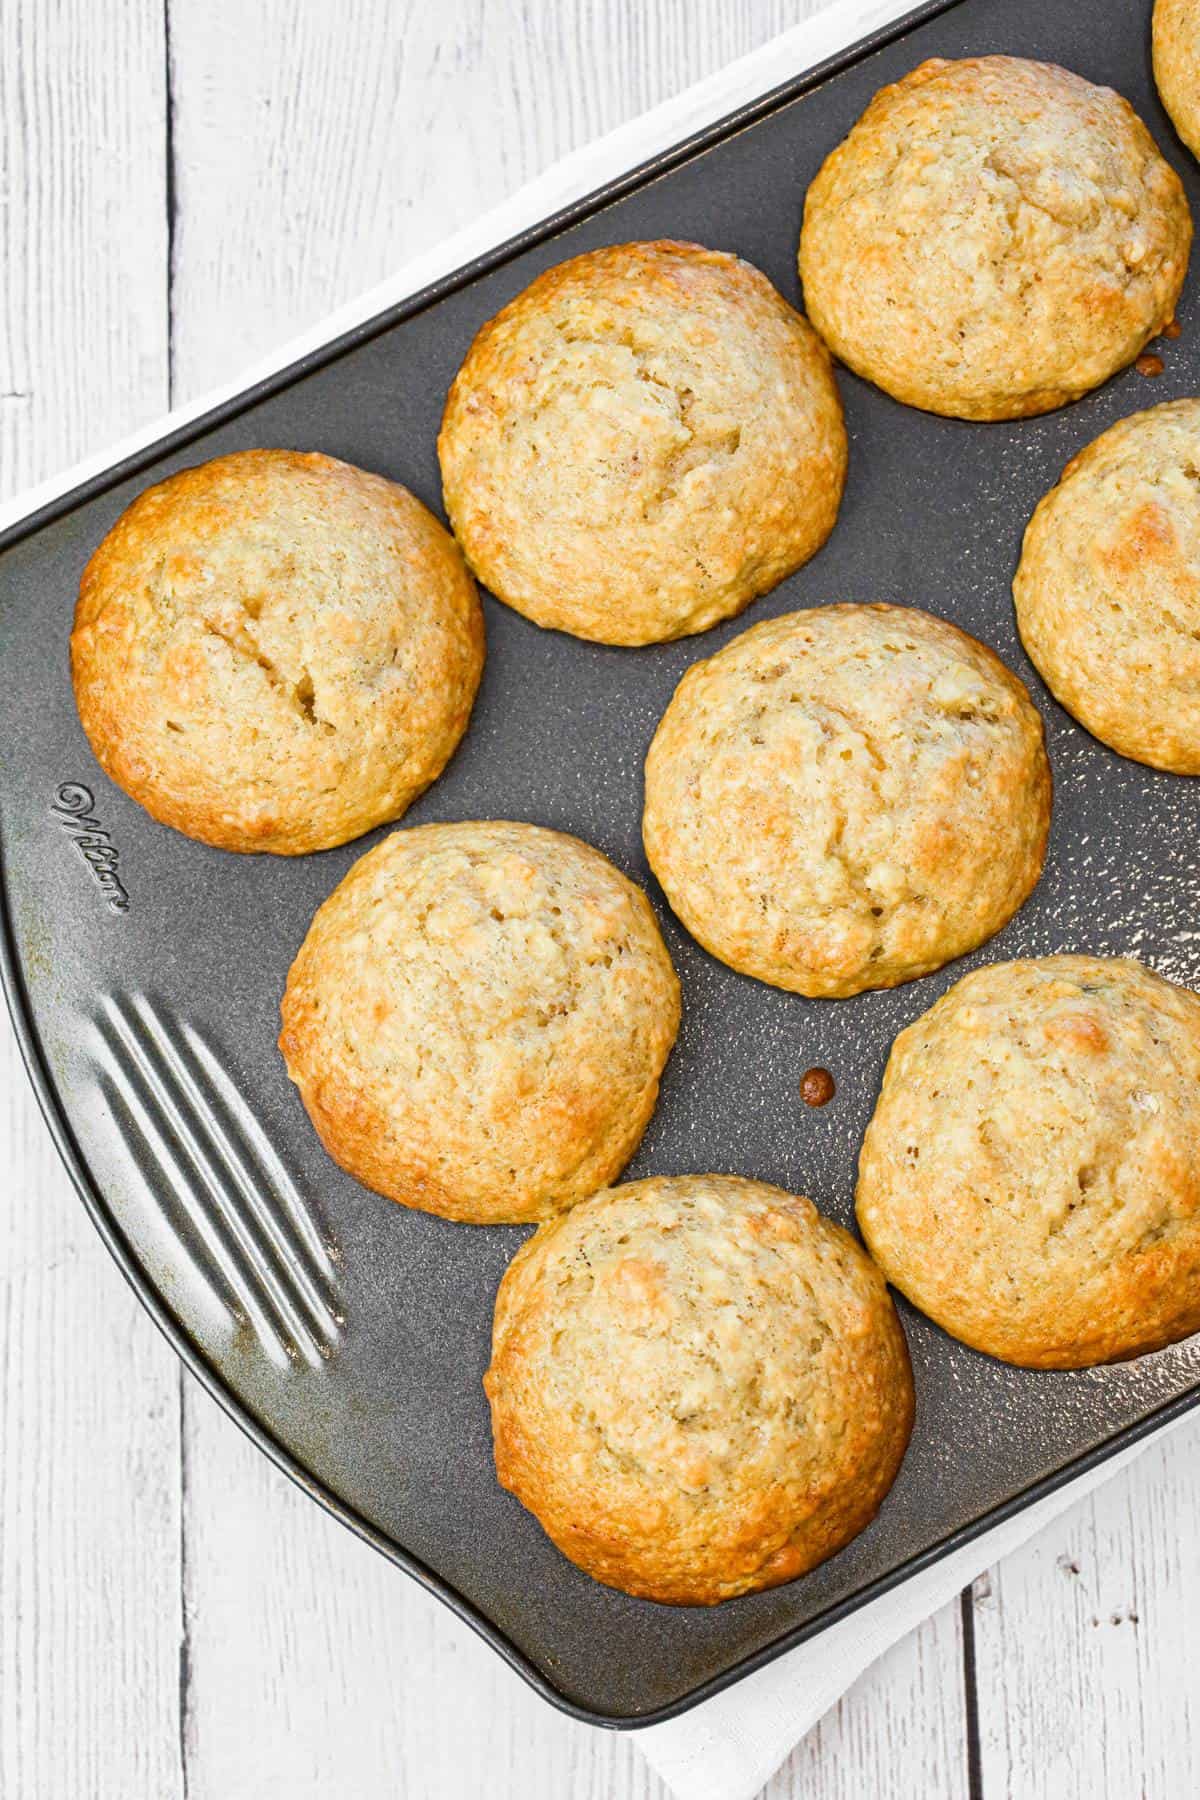 Banana Nut Muffins are delicious homemade banana muffins loaded with chopped walnuts.